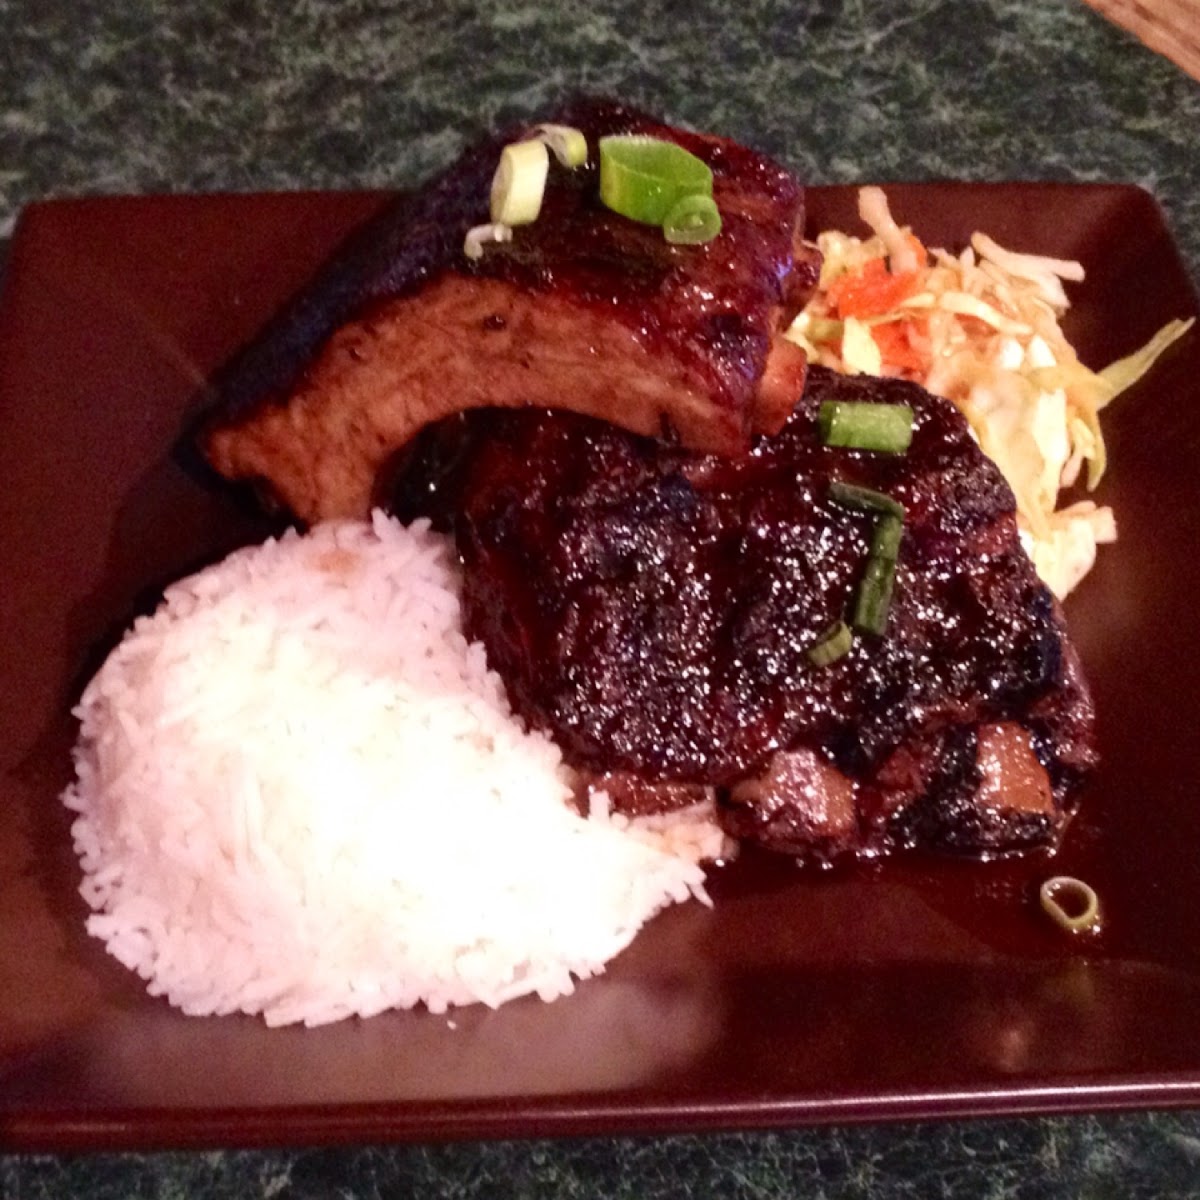 Braised Baby Back Ribs with Basmati Rice and Asian Slaw